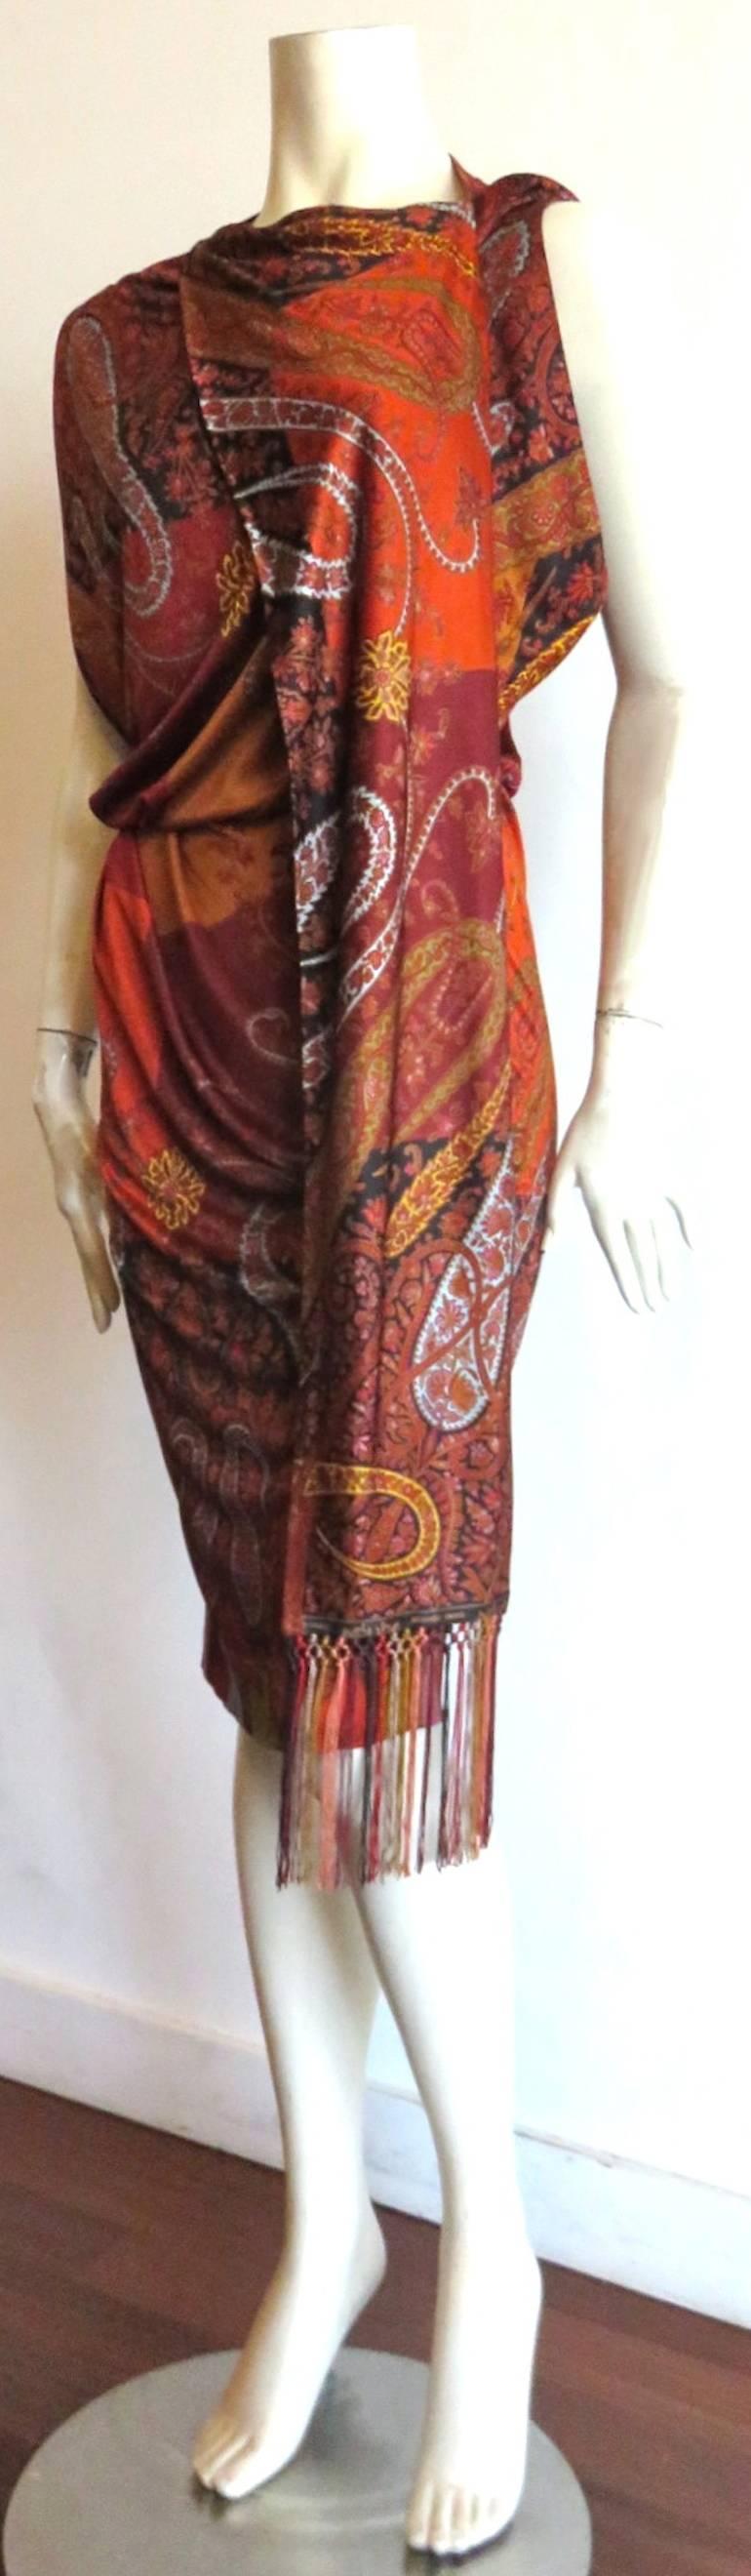 Never worn, HERMES PARIS by Jean-Paul Gaultier, Paisley printed stretch dress with fabulous, fringed, scarf detail front.

Loose fit, blouson-style top with elasticated waist, and draped bottom.

'HERMES PARIS' logo is printed at bottom border